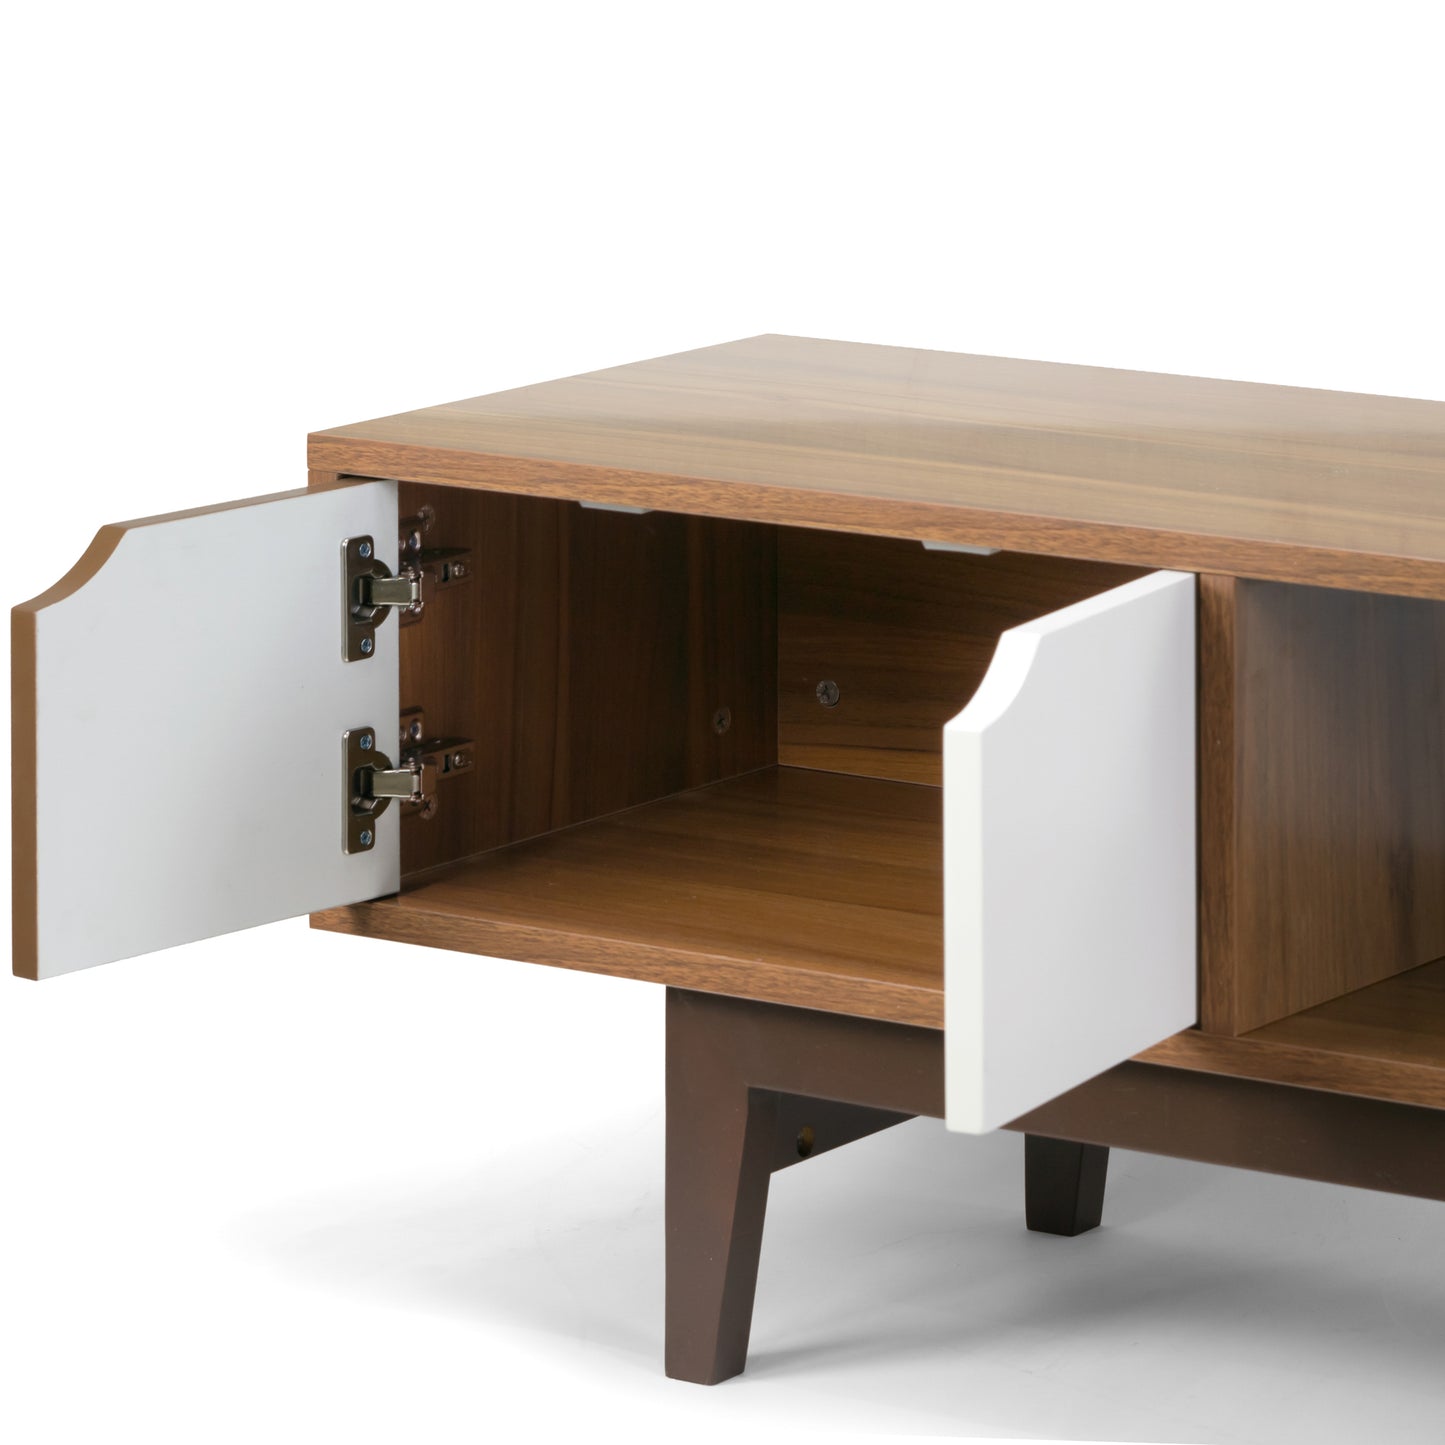 Alvin Scandinavian Style Walnut Finish TV Stand with Contrasting Drawers